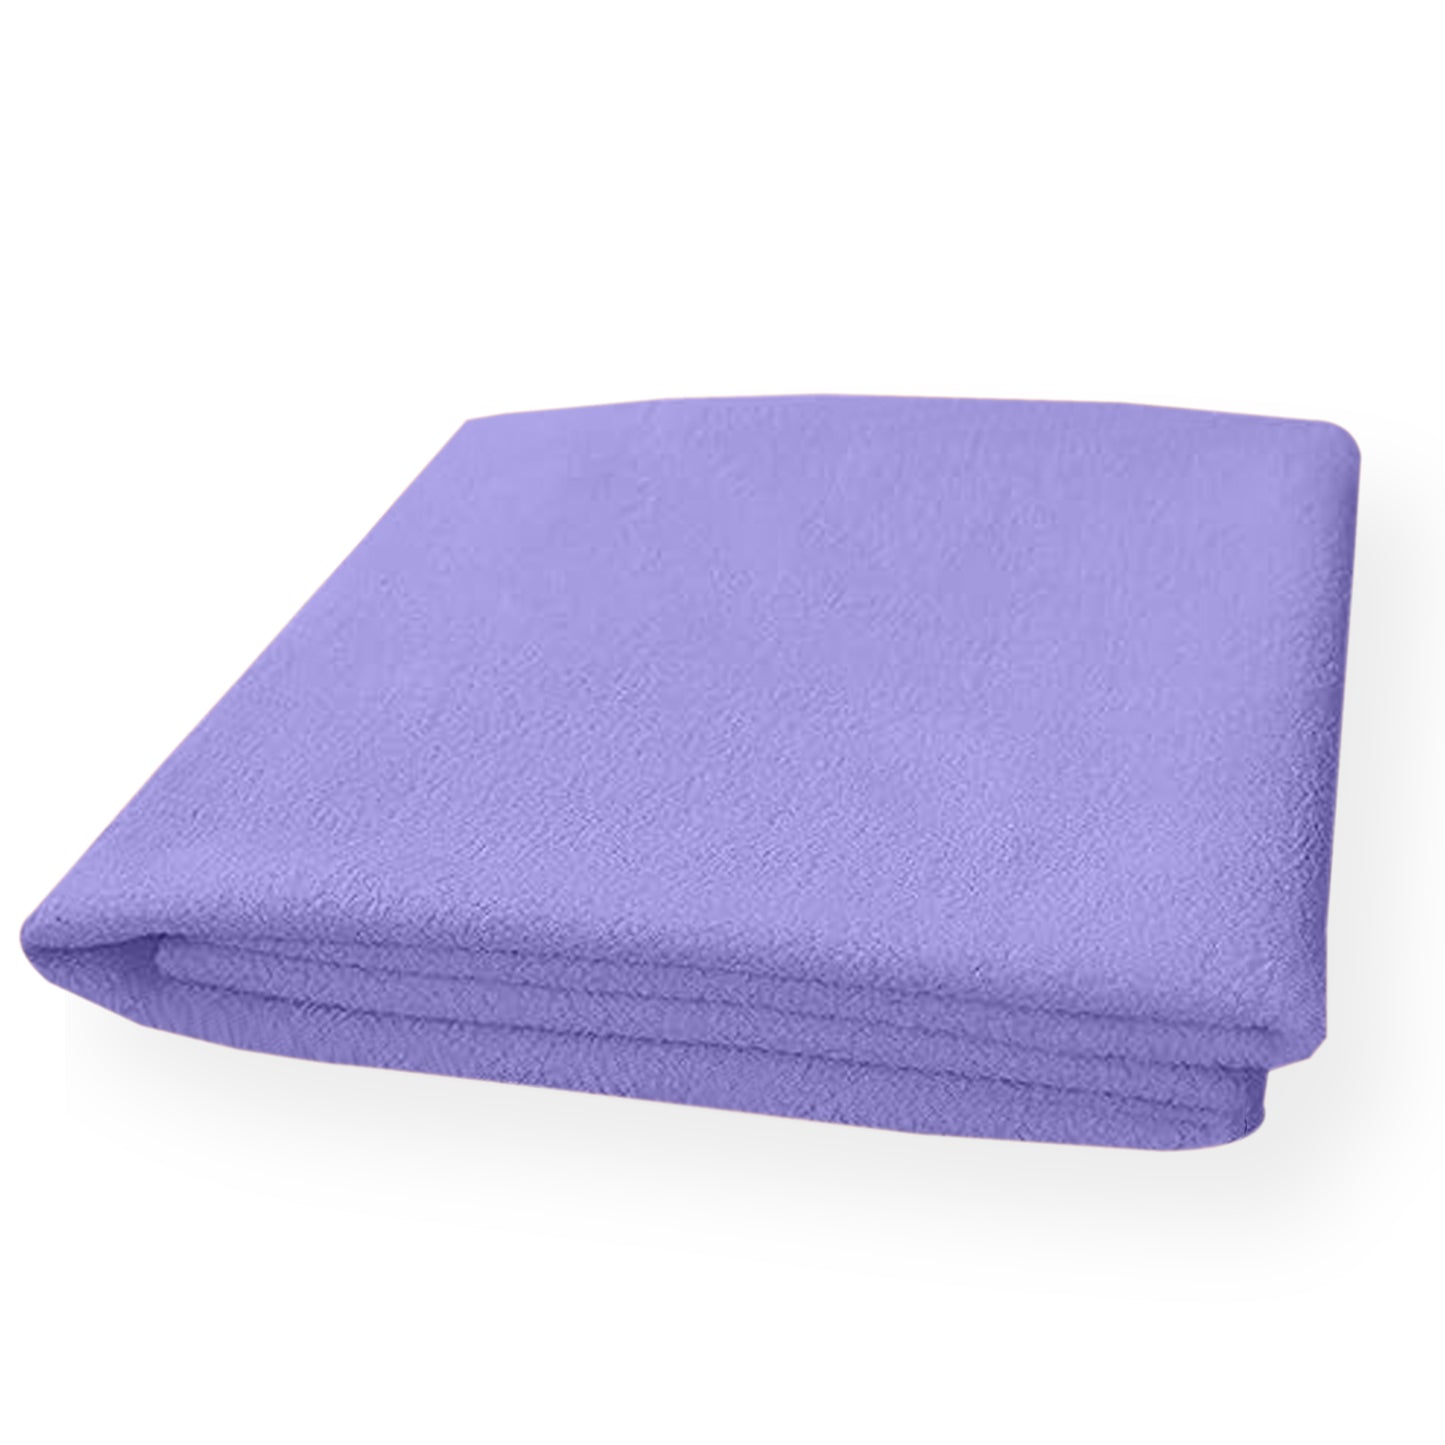 Waterproof Bed Protector, Quick Dry Sheet, Baby Bed Protector (70 X 100 CM), Pack of 1 -LILAC